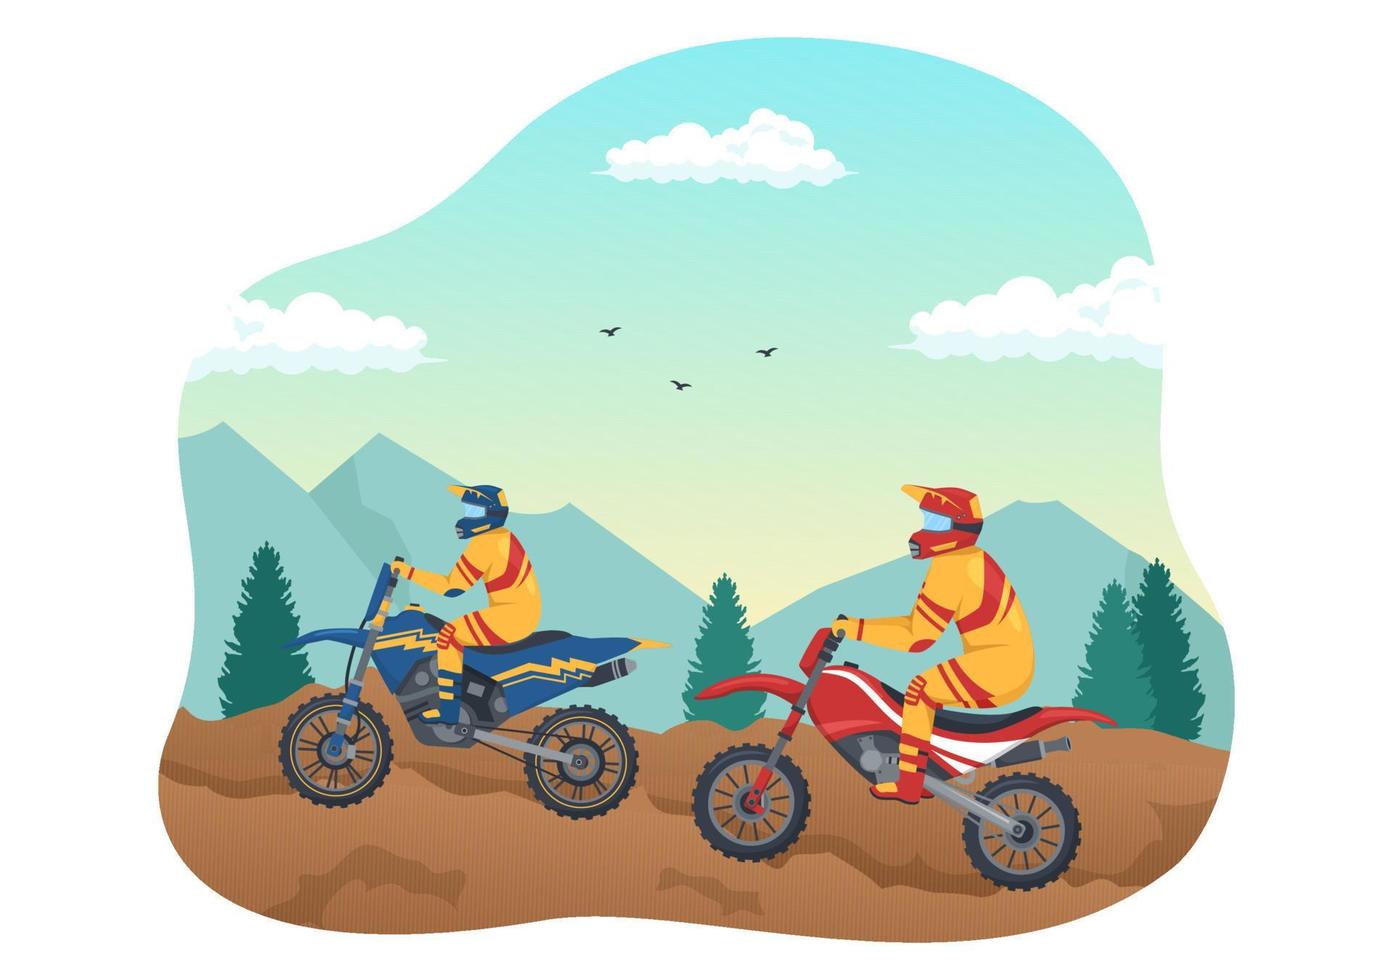 Motocross Illustration with a Rider Riding a Bike Through Mud, Rocky Roads and Adventure in Extreme Sport Flat Cartoon Hand Drawn Template vector